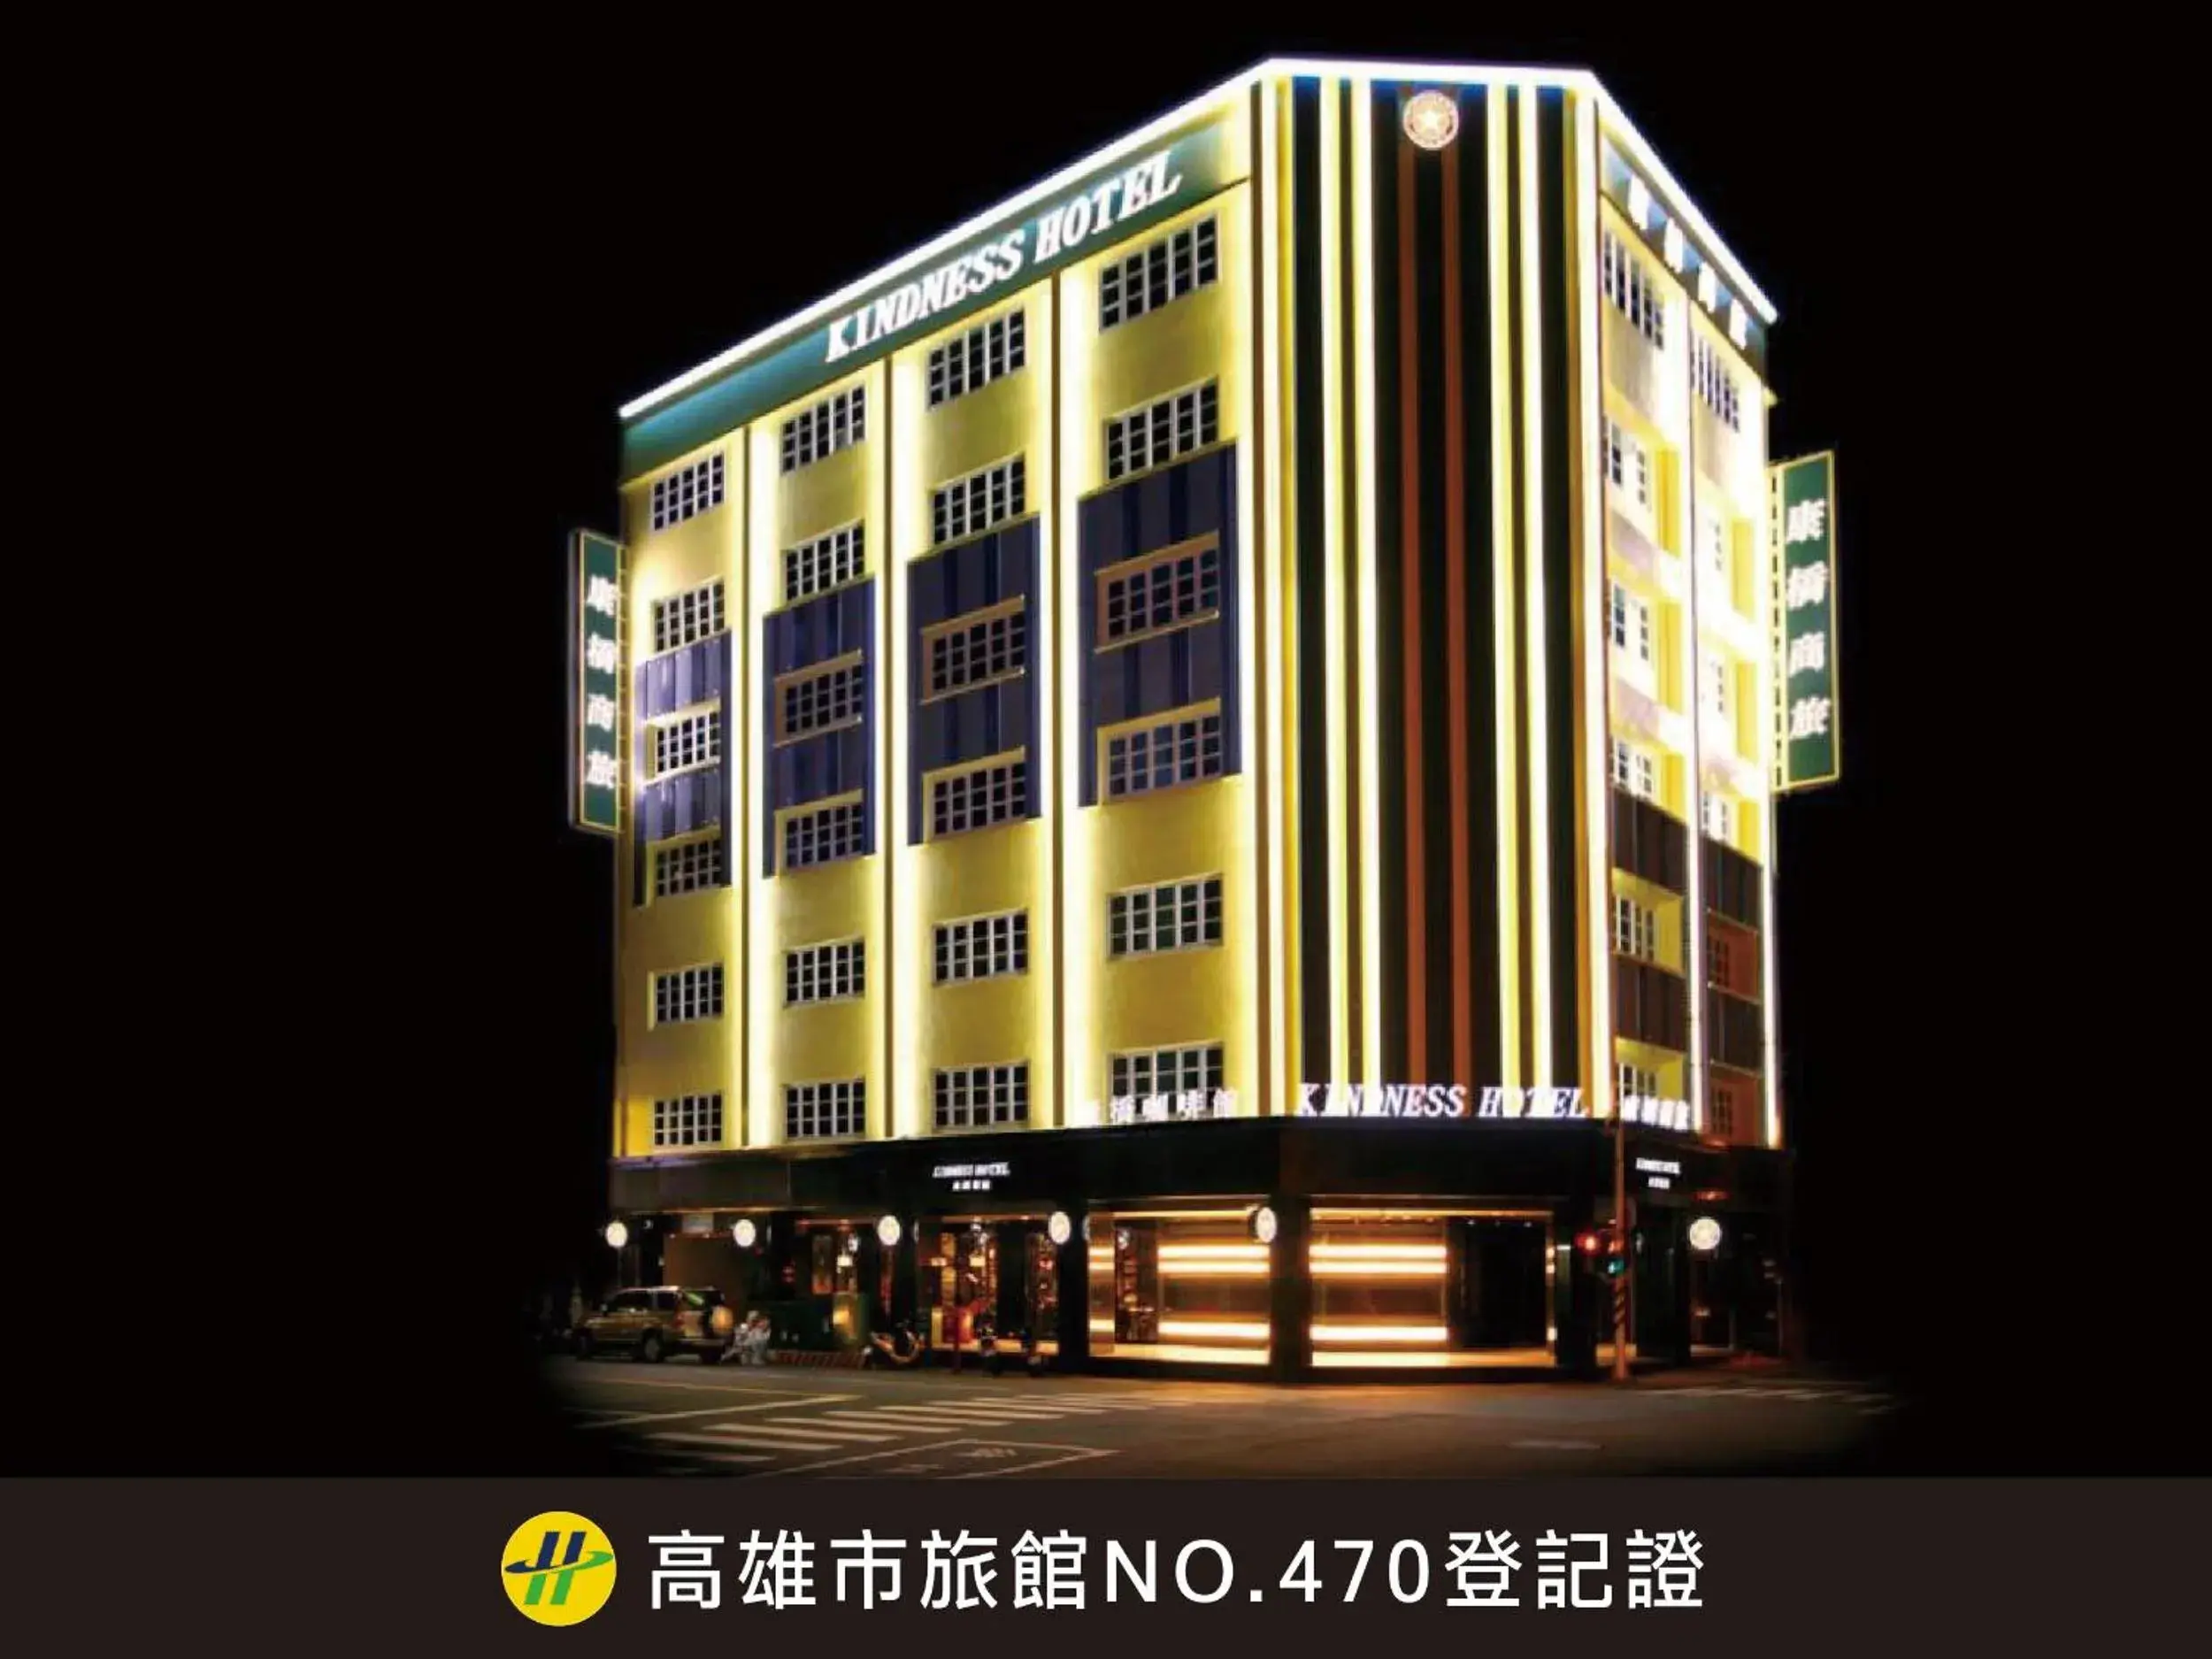 Property Building in Kindness Hotel- Zhong Shan Bade